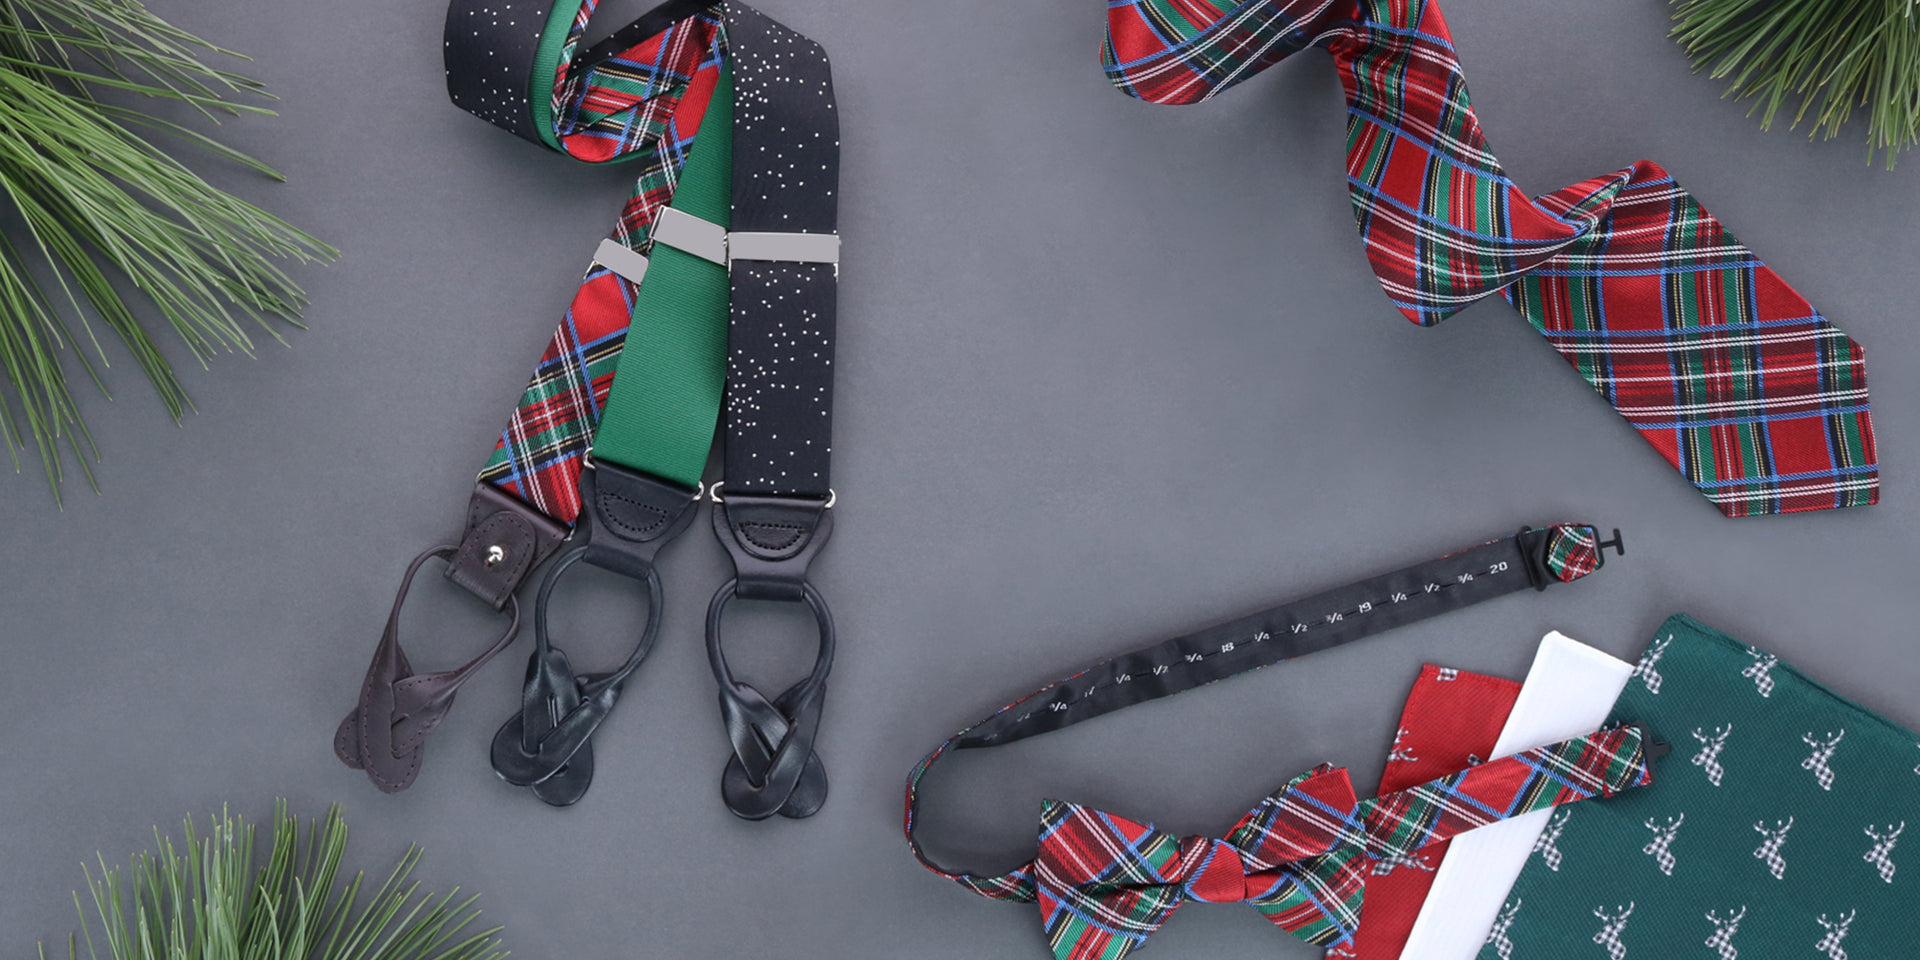 various holiday accessories including suspenders, ties, and pocket squares